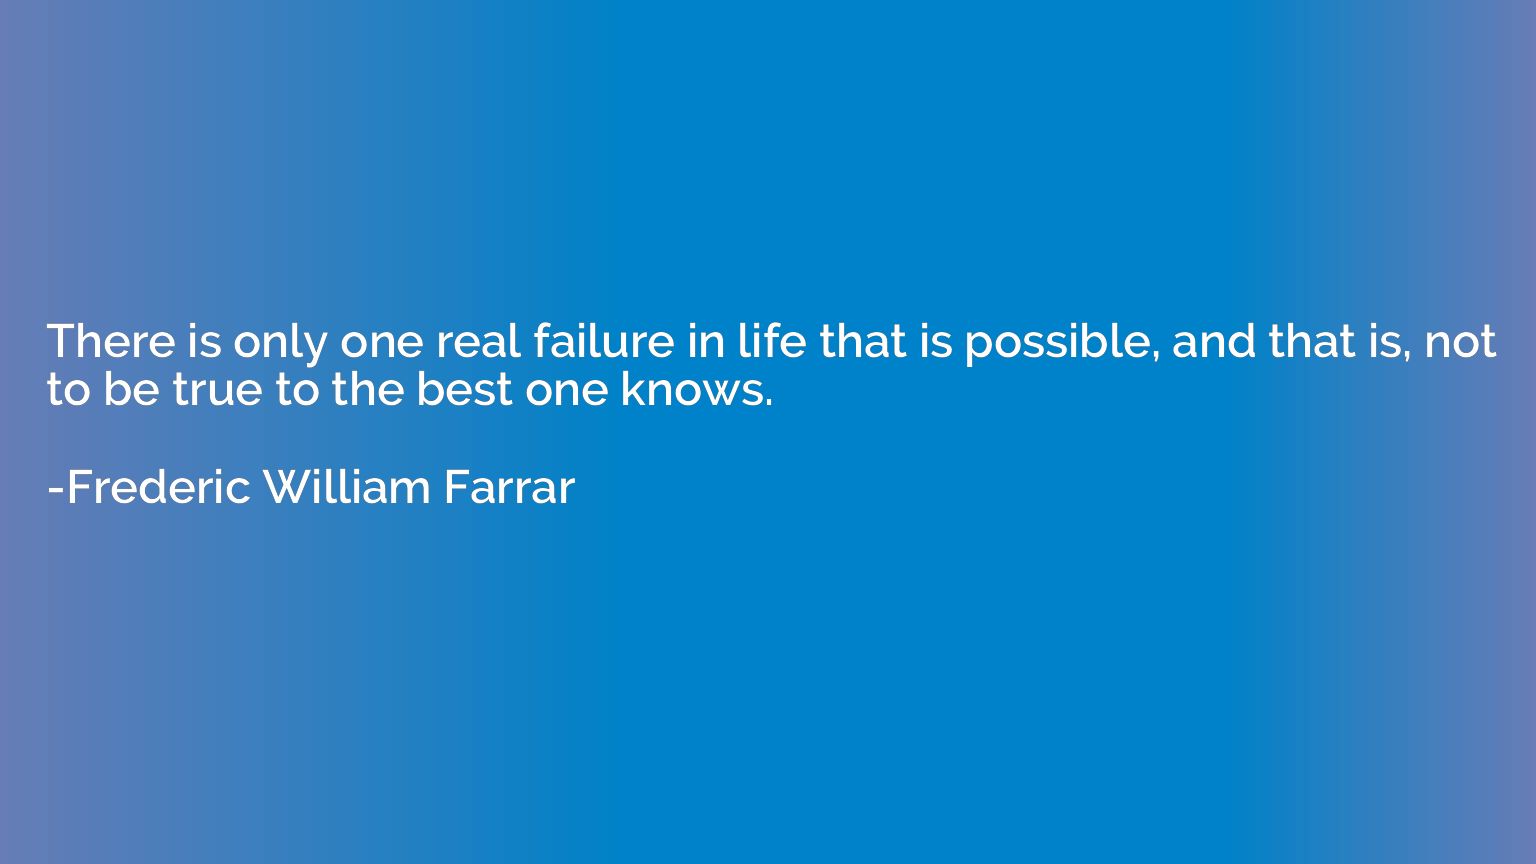 There is only one real failure in life that is possible, and